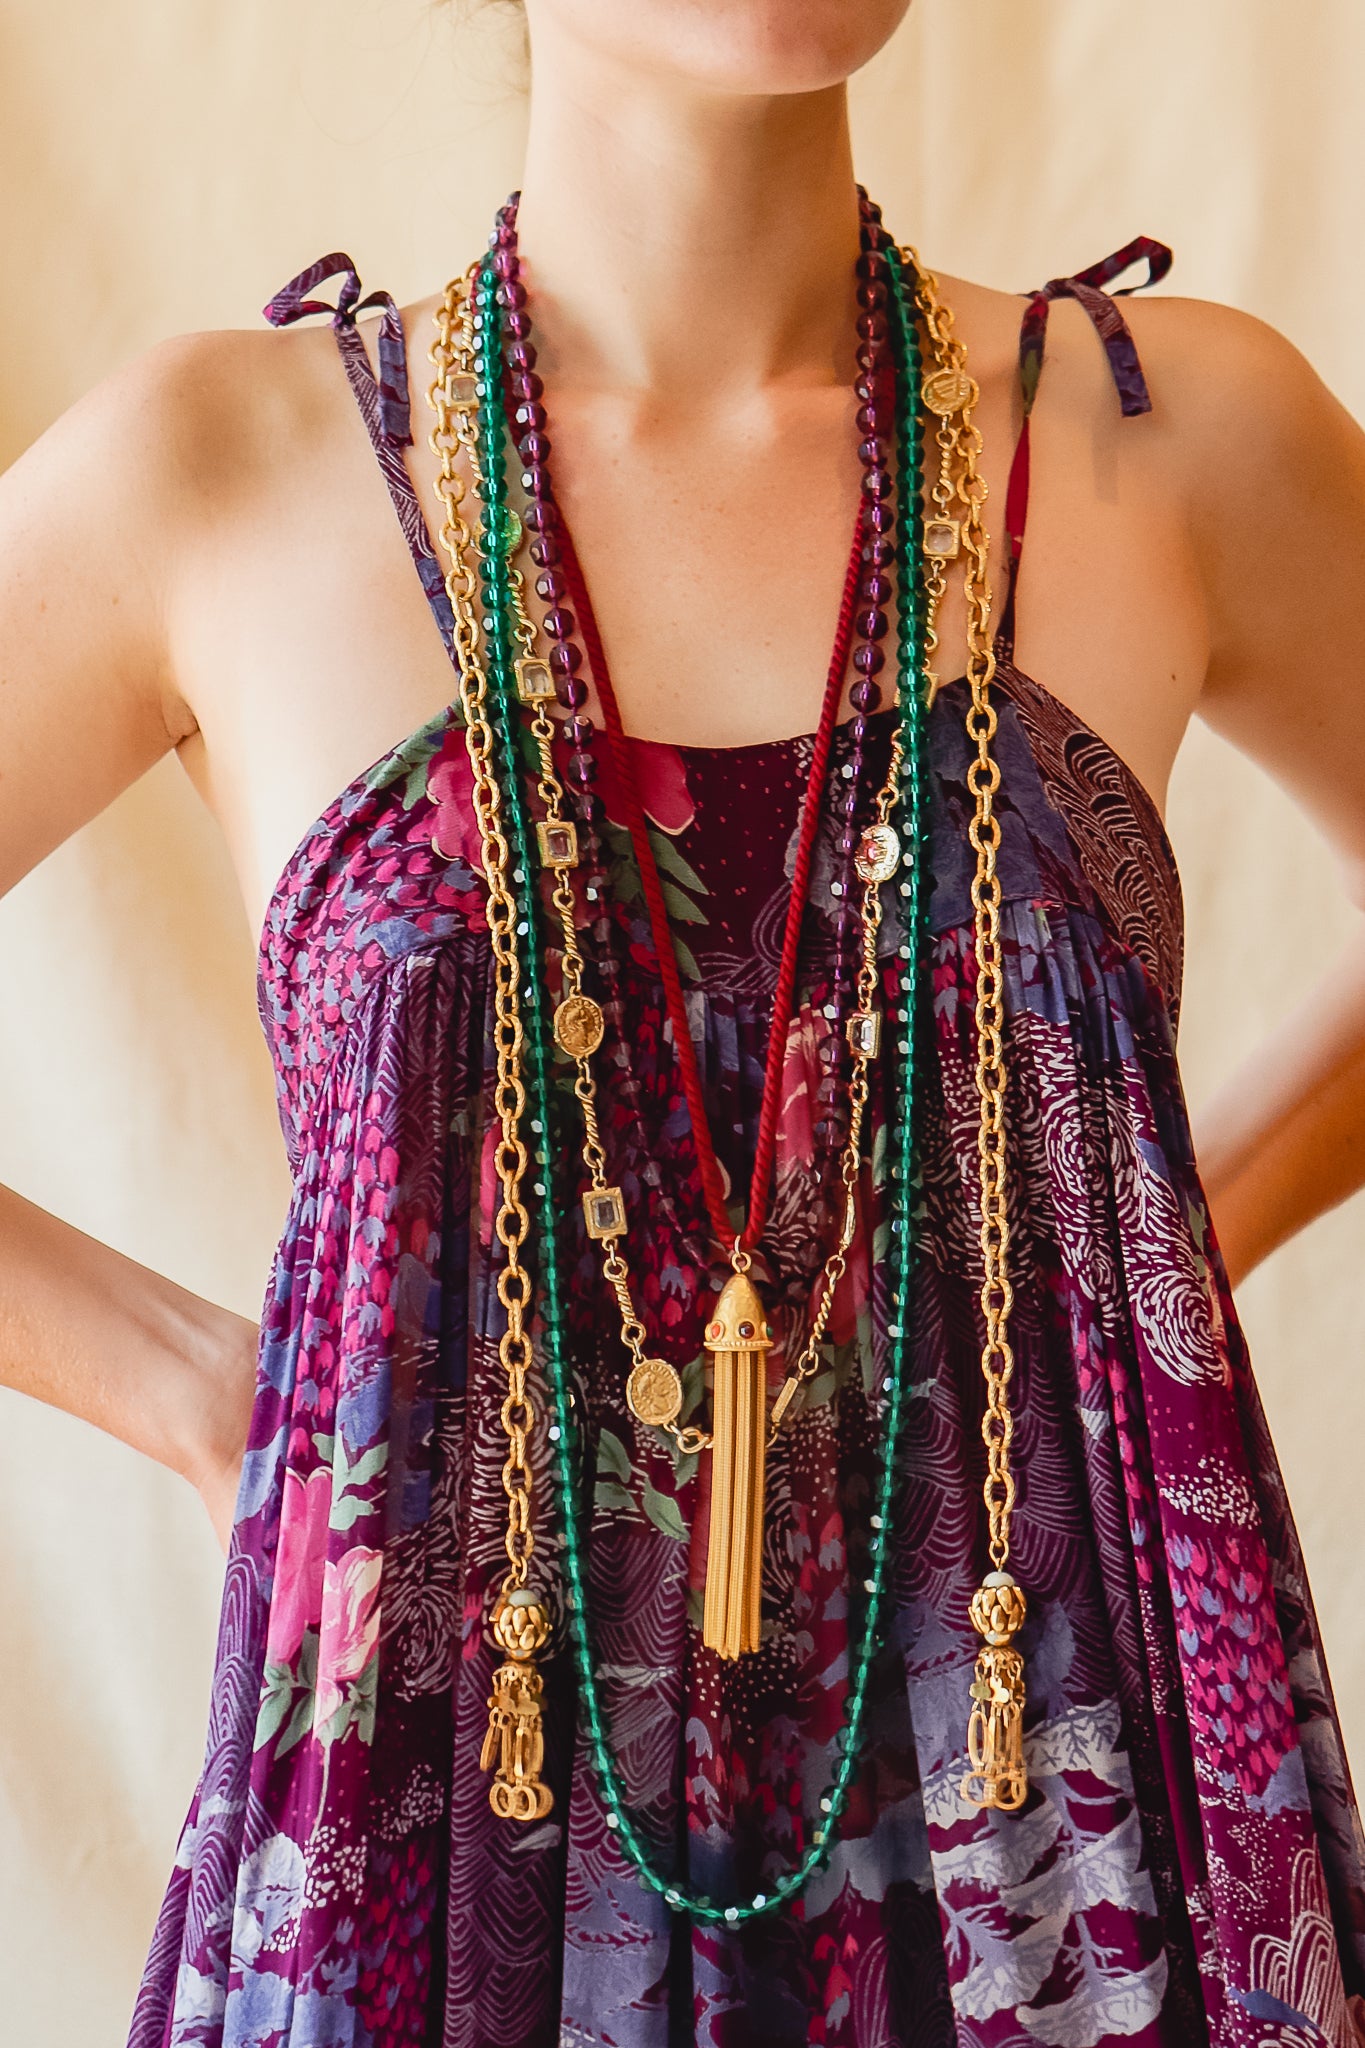 Recess Vintage Consignment LA Girl in Adini Sheer Purple Harem Jumpsuit and necklaces